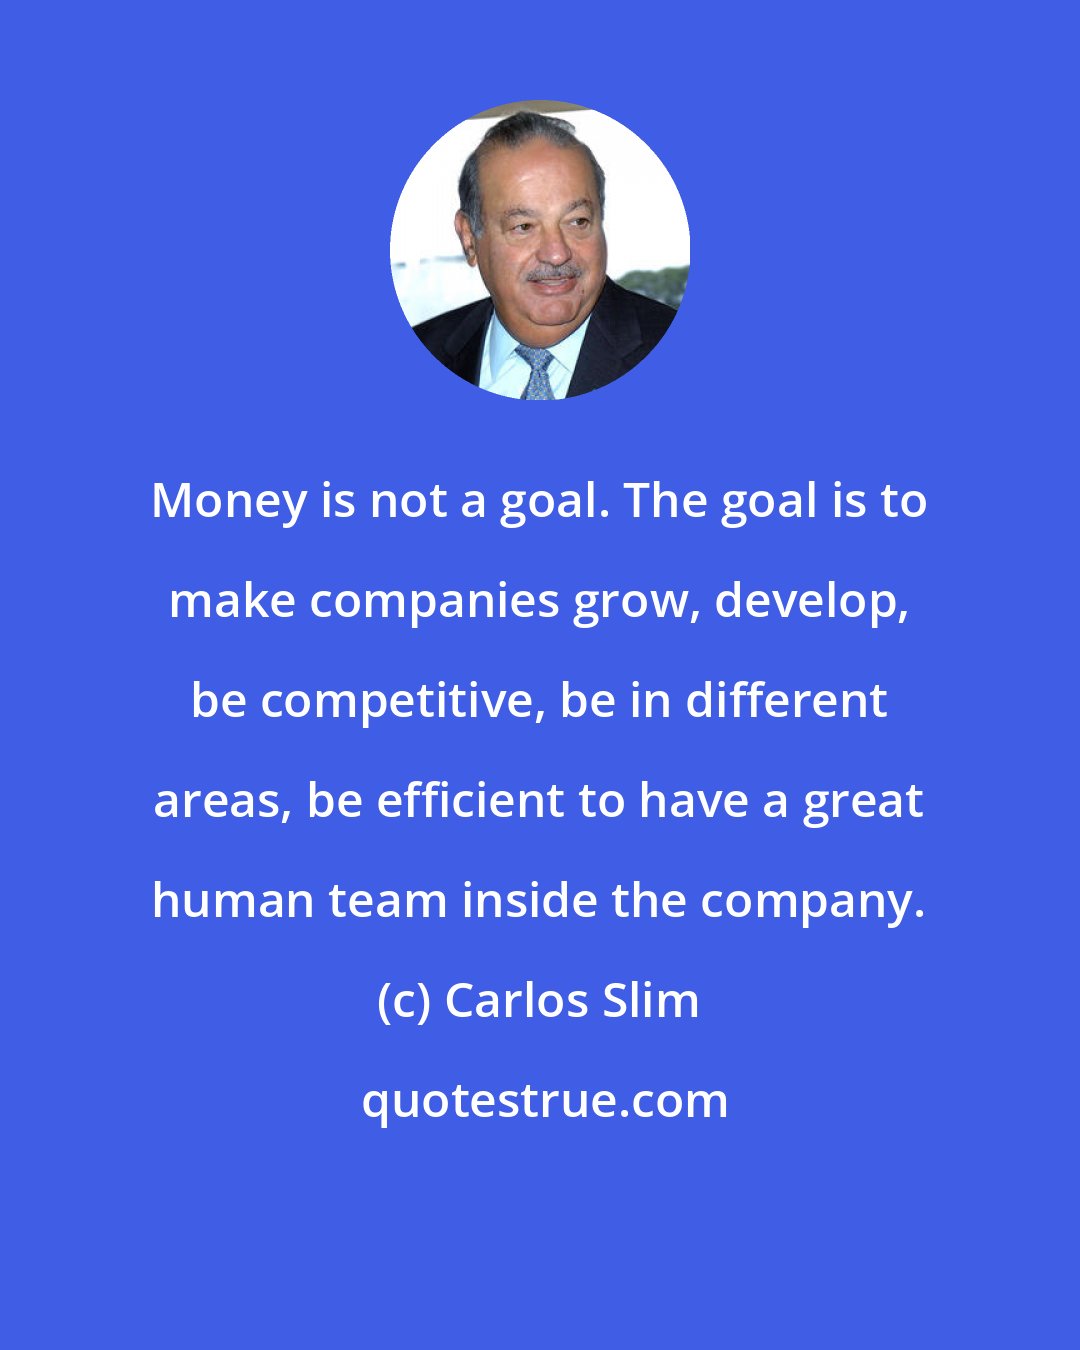 Carlos Slim: Money is not a goal. The goal is to make companies grow, develop, be competitive, be in different areas, be efficient to have a great human team inside the company.